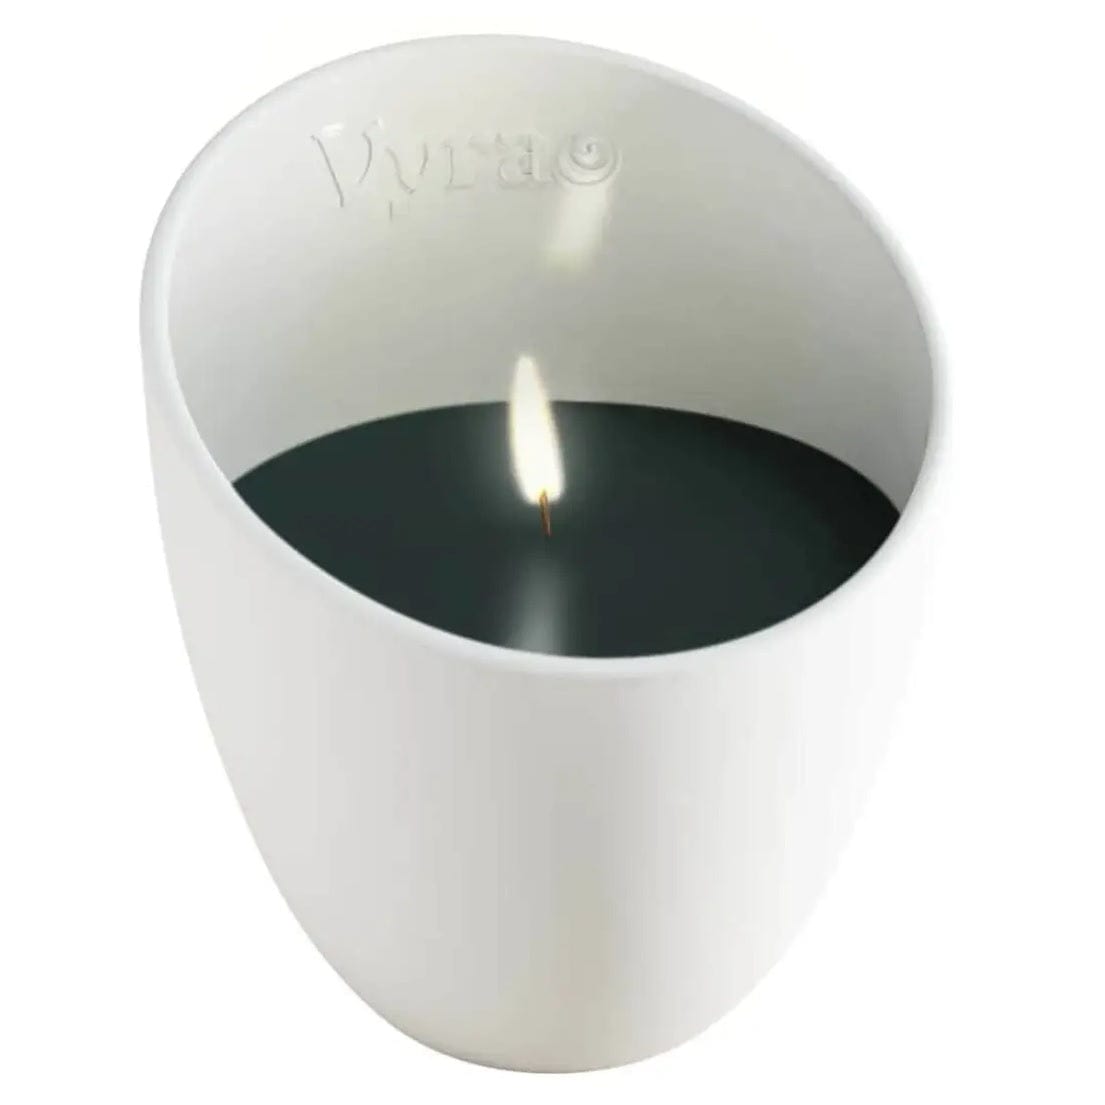 Vyrao Home & Kitchen Vyrao Ember Candle 170g